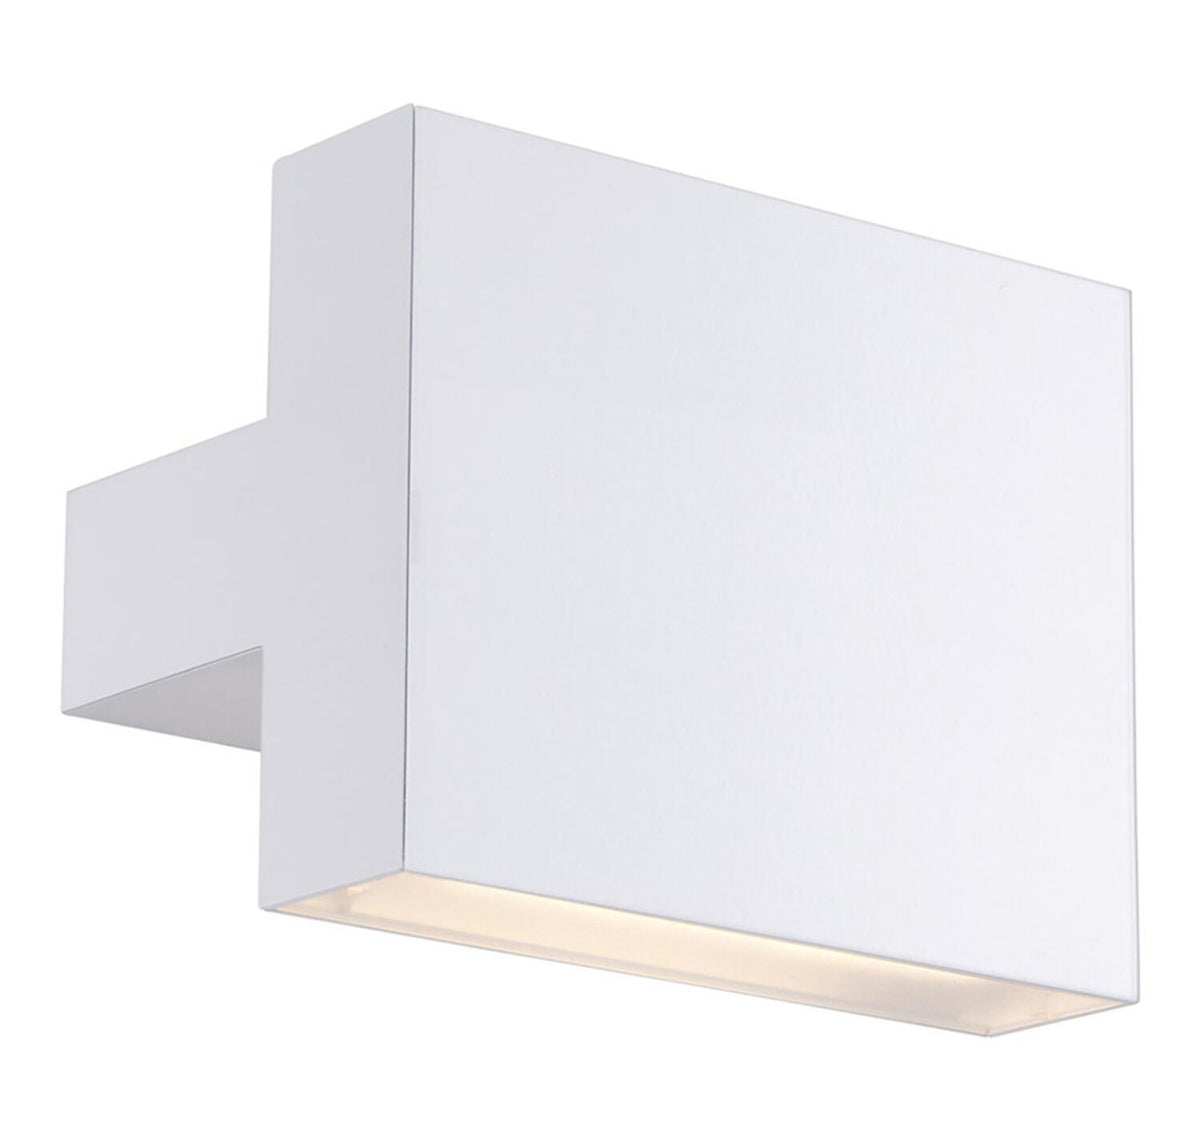 TIGHT LIGHT LED WALL SCONCE BY PIERO LISSONI